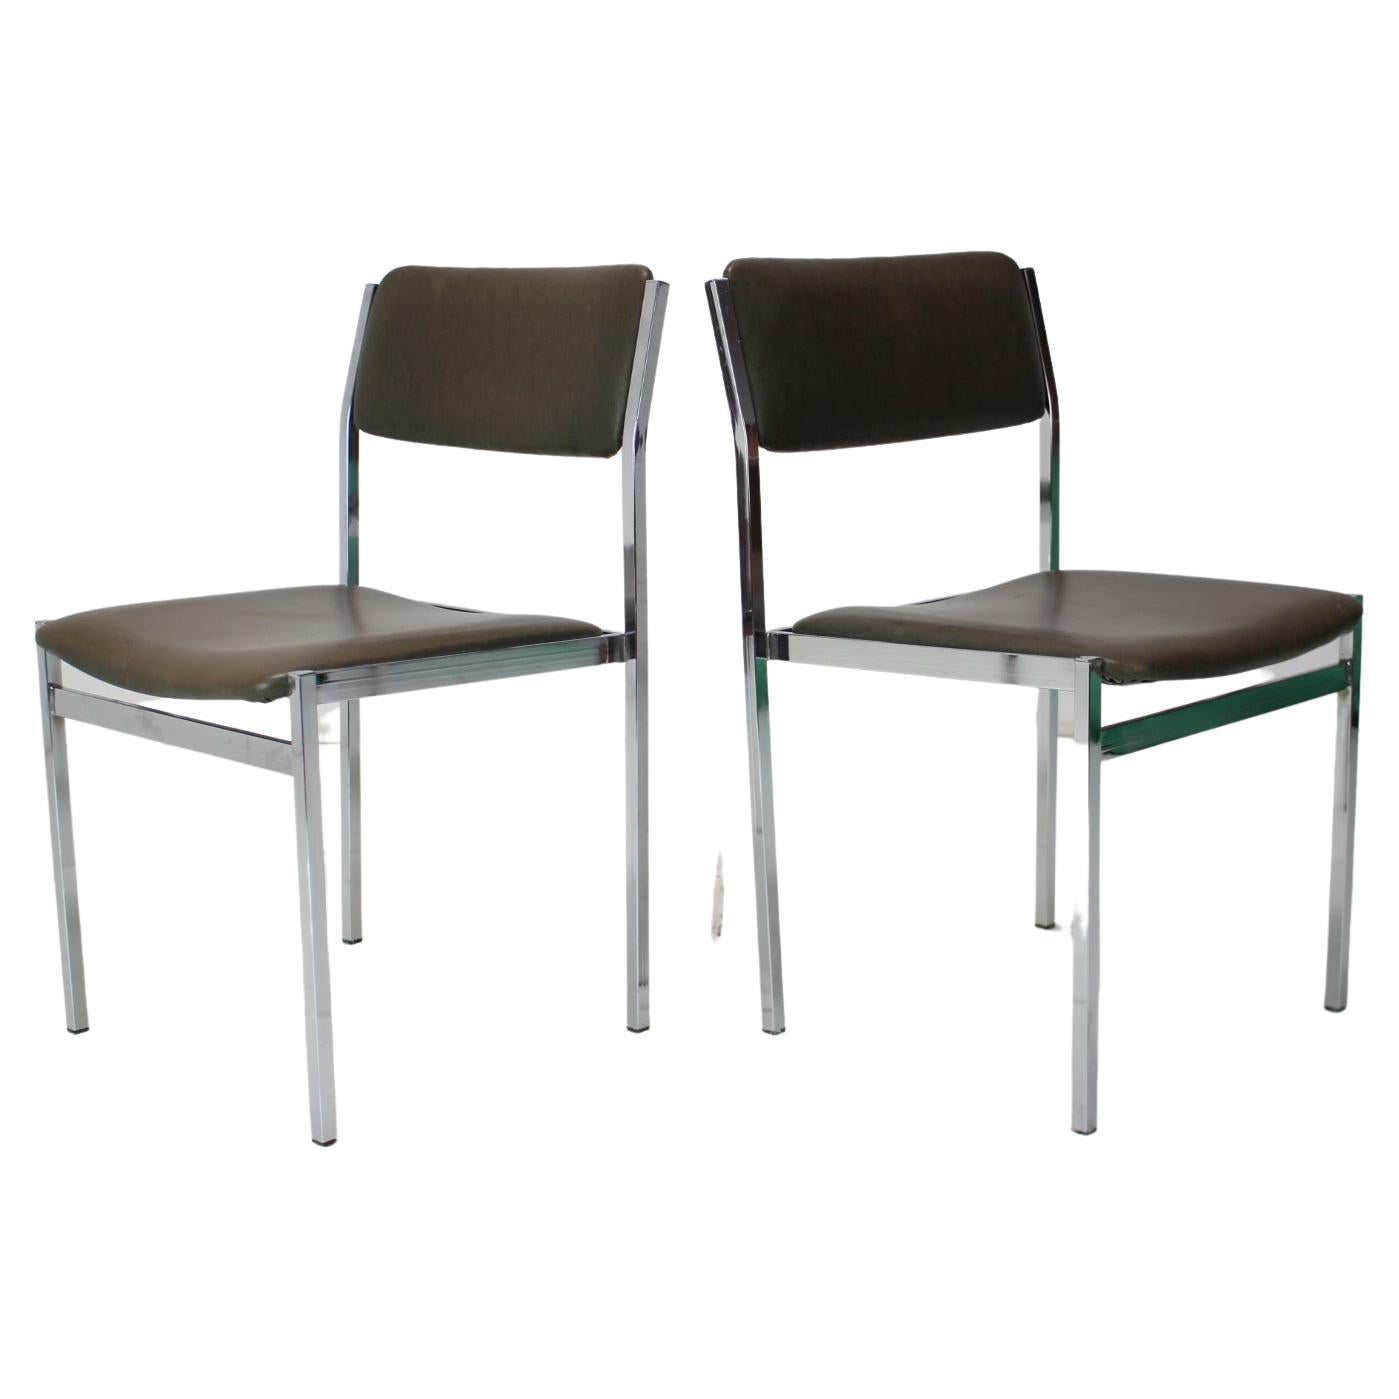 Set of Two Chrome Chairs, 1970's For Sale